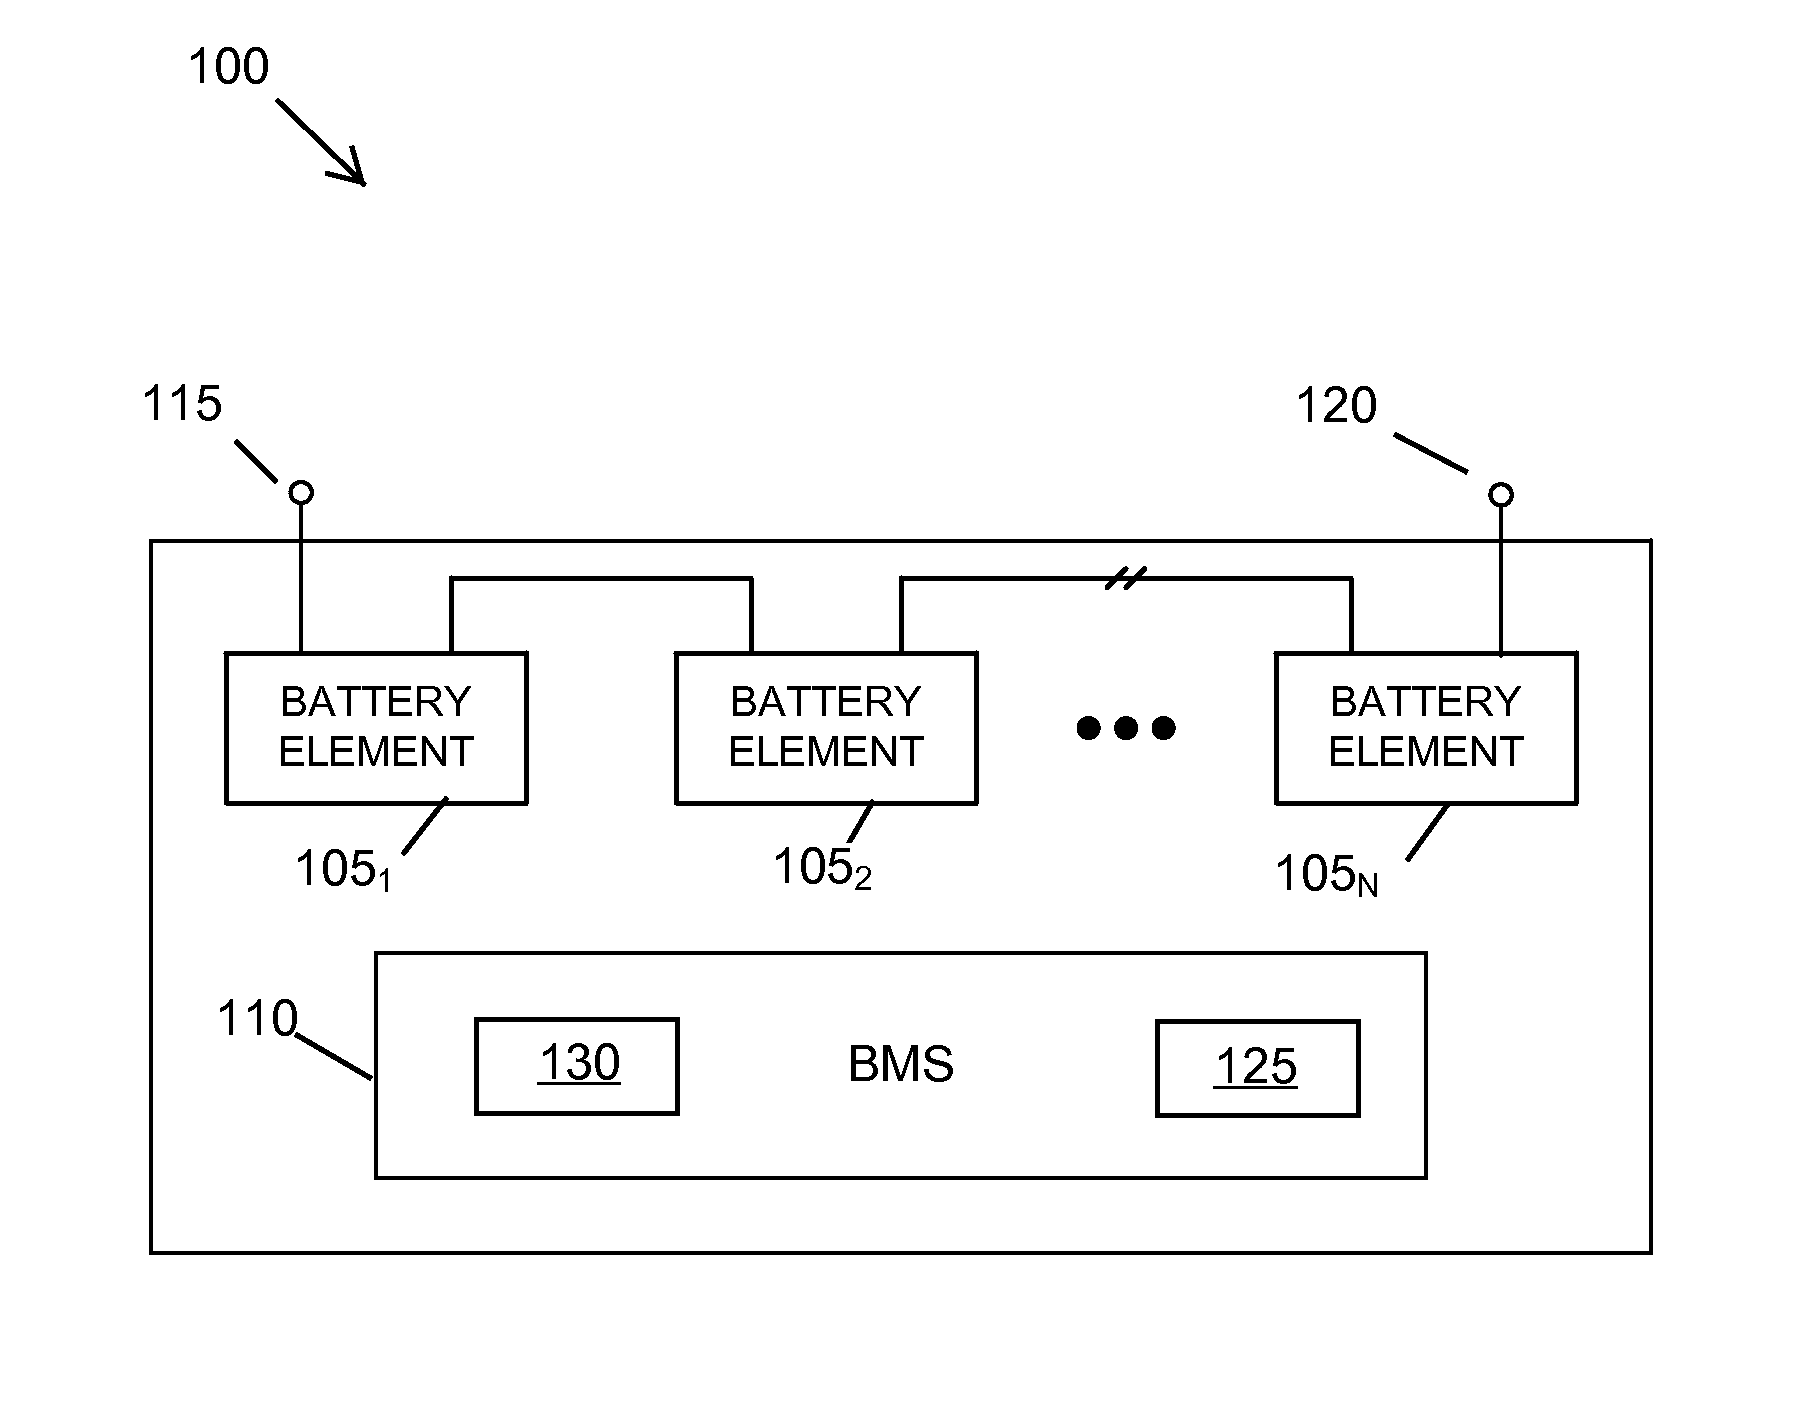 Response to detection of an overcharge event in a series connected battery element